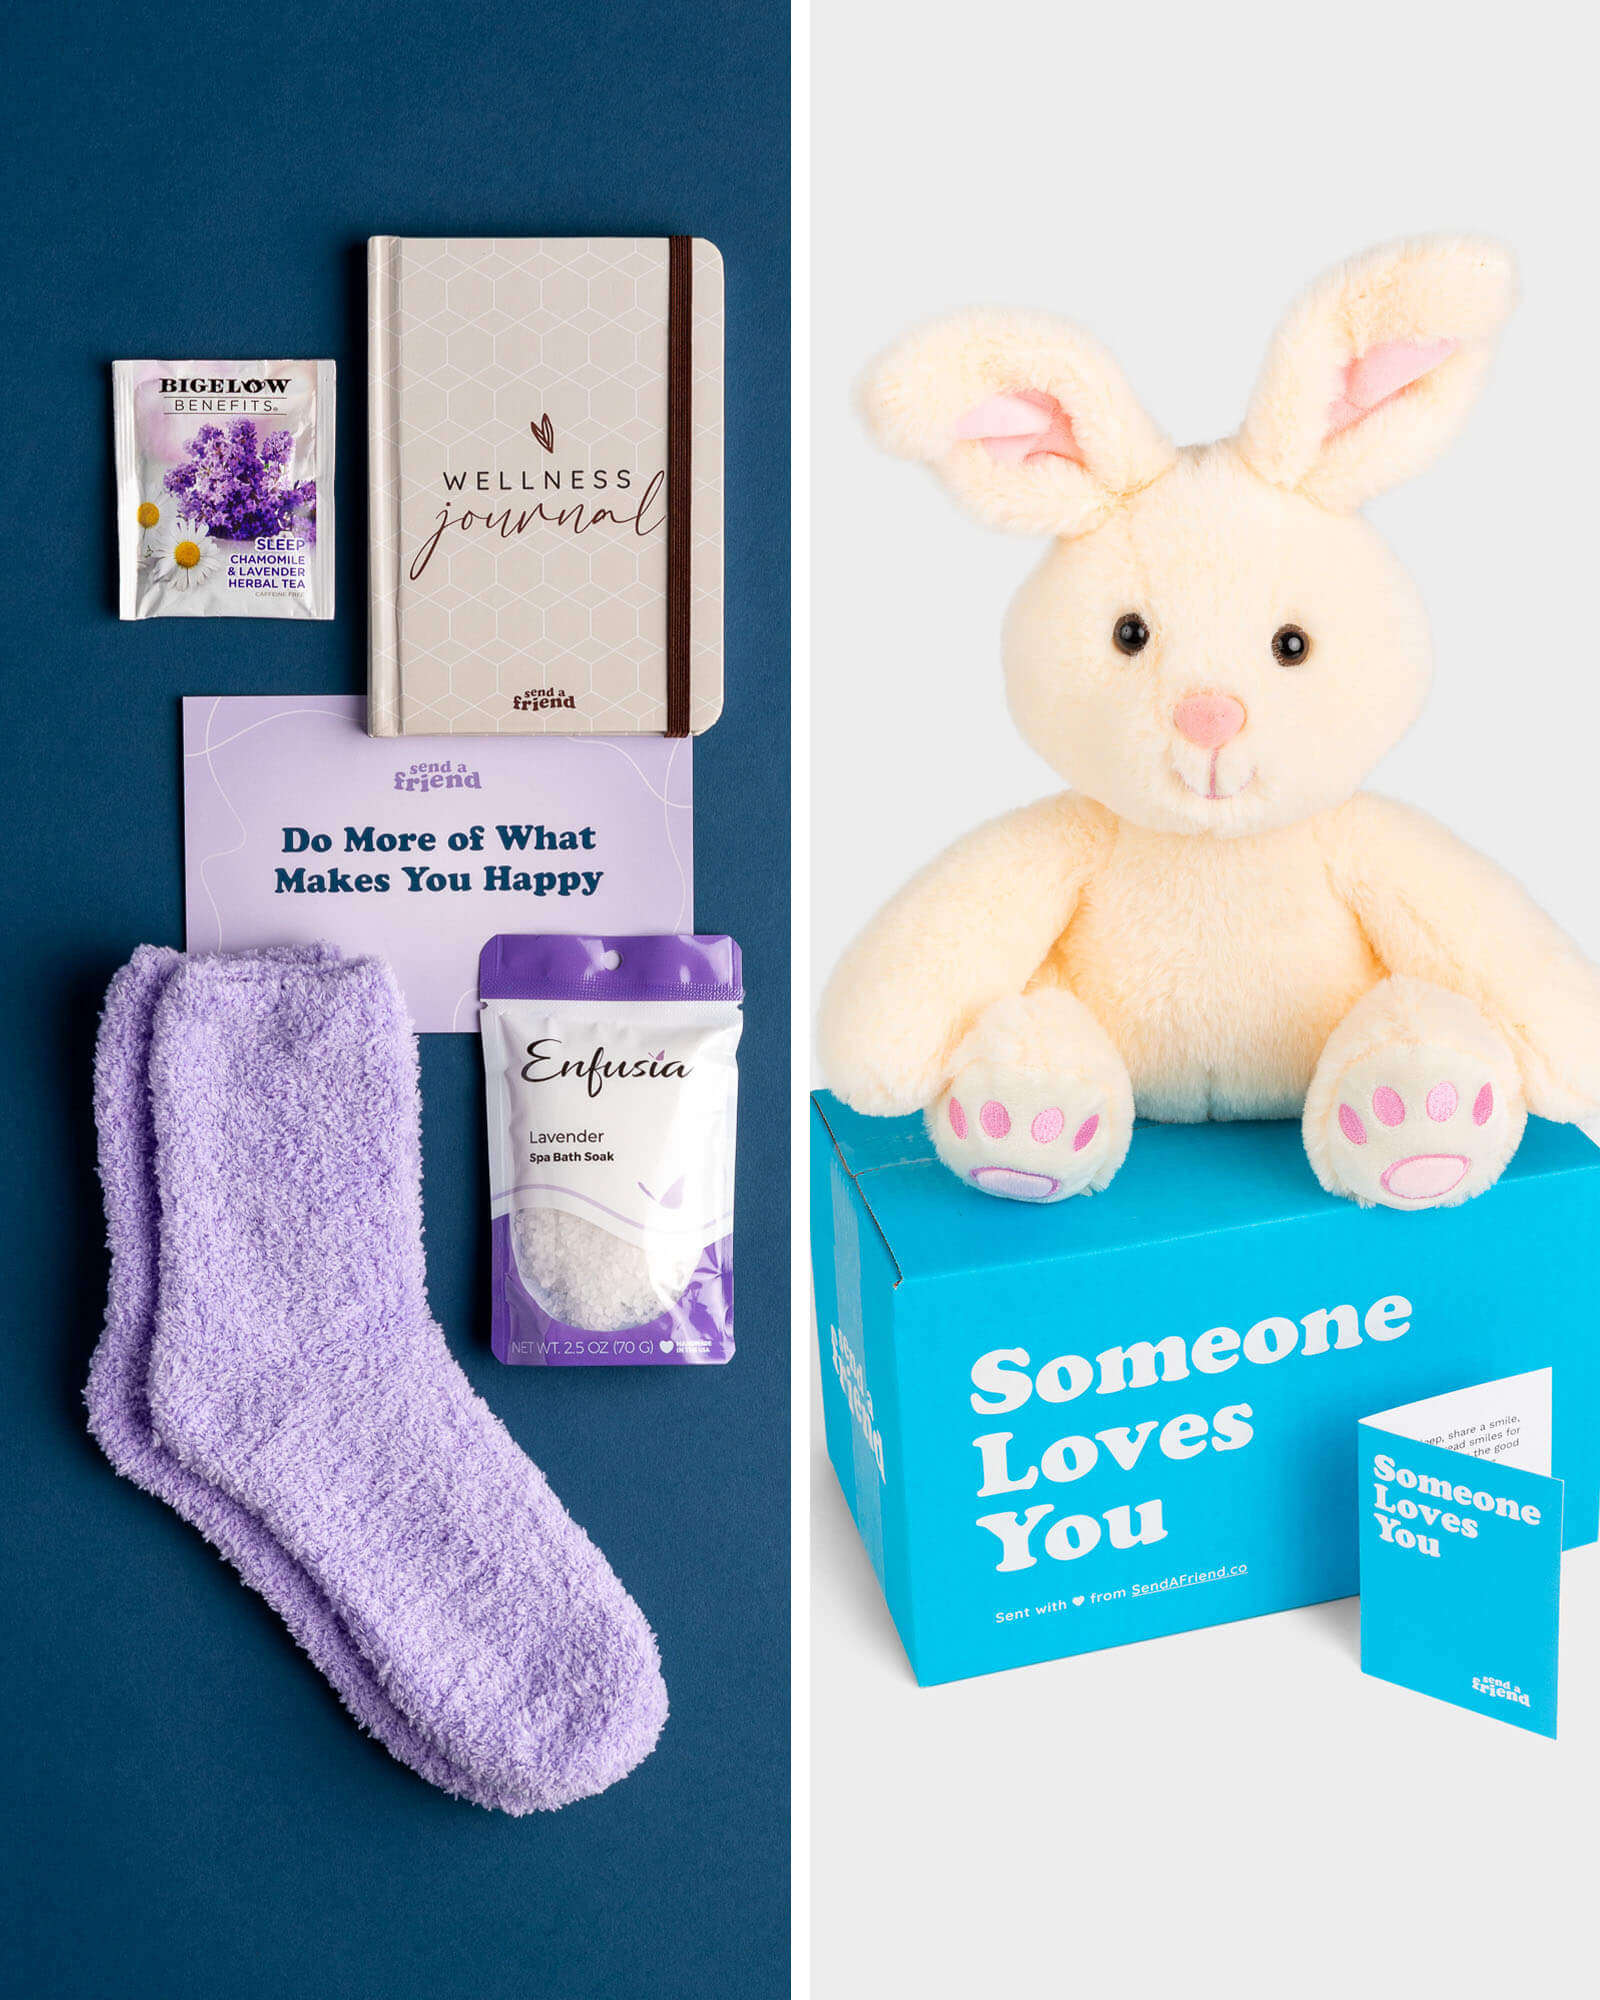 Benny the Bunny  SendAFriend's Stuffed Animal Care Packages